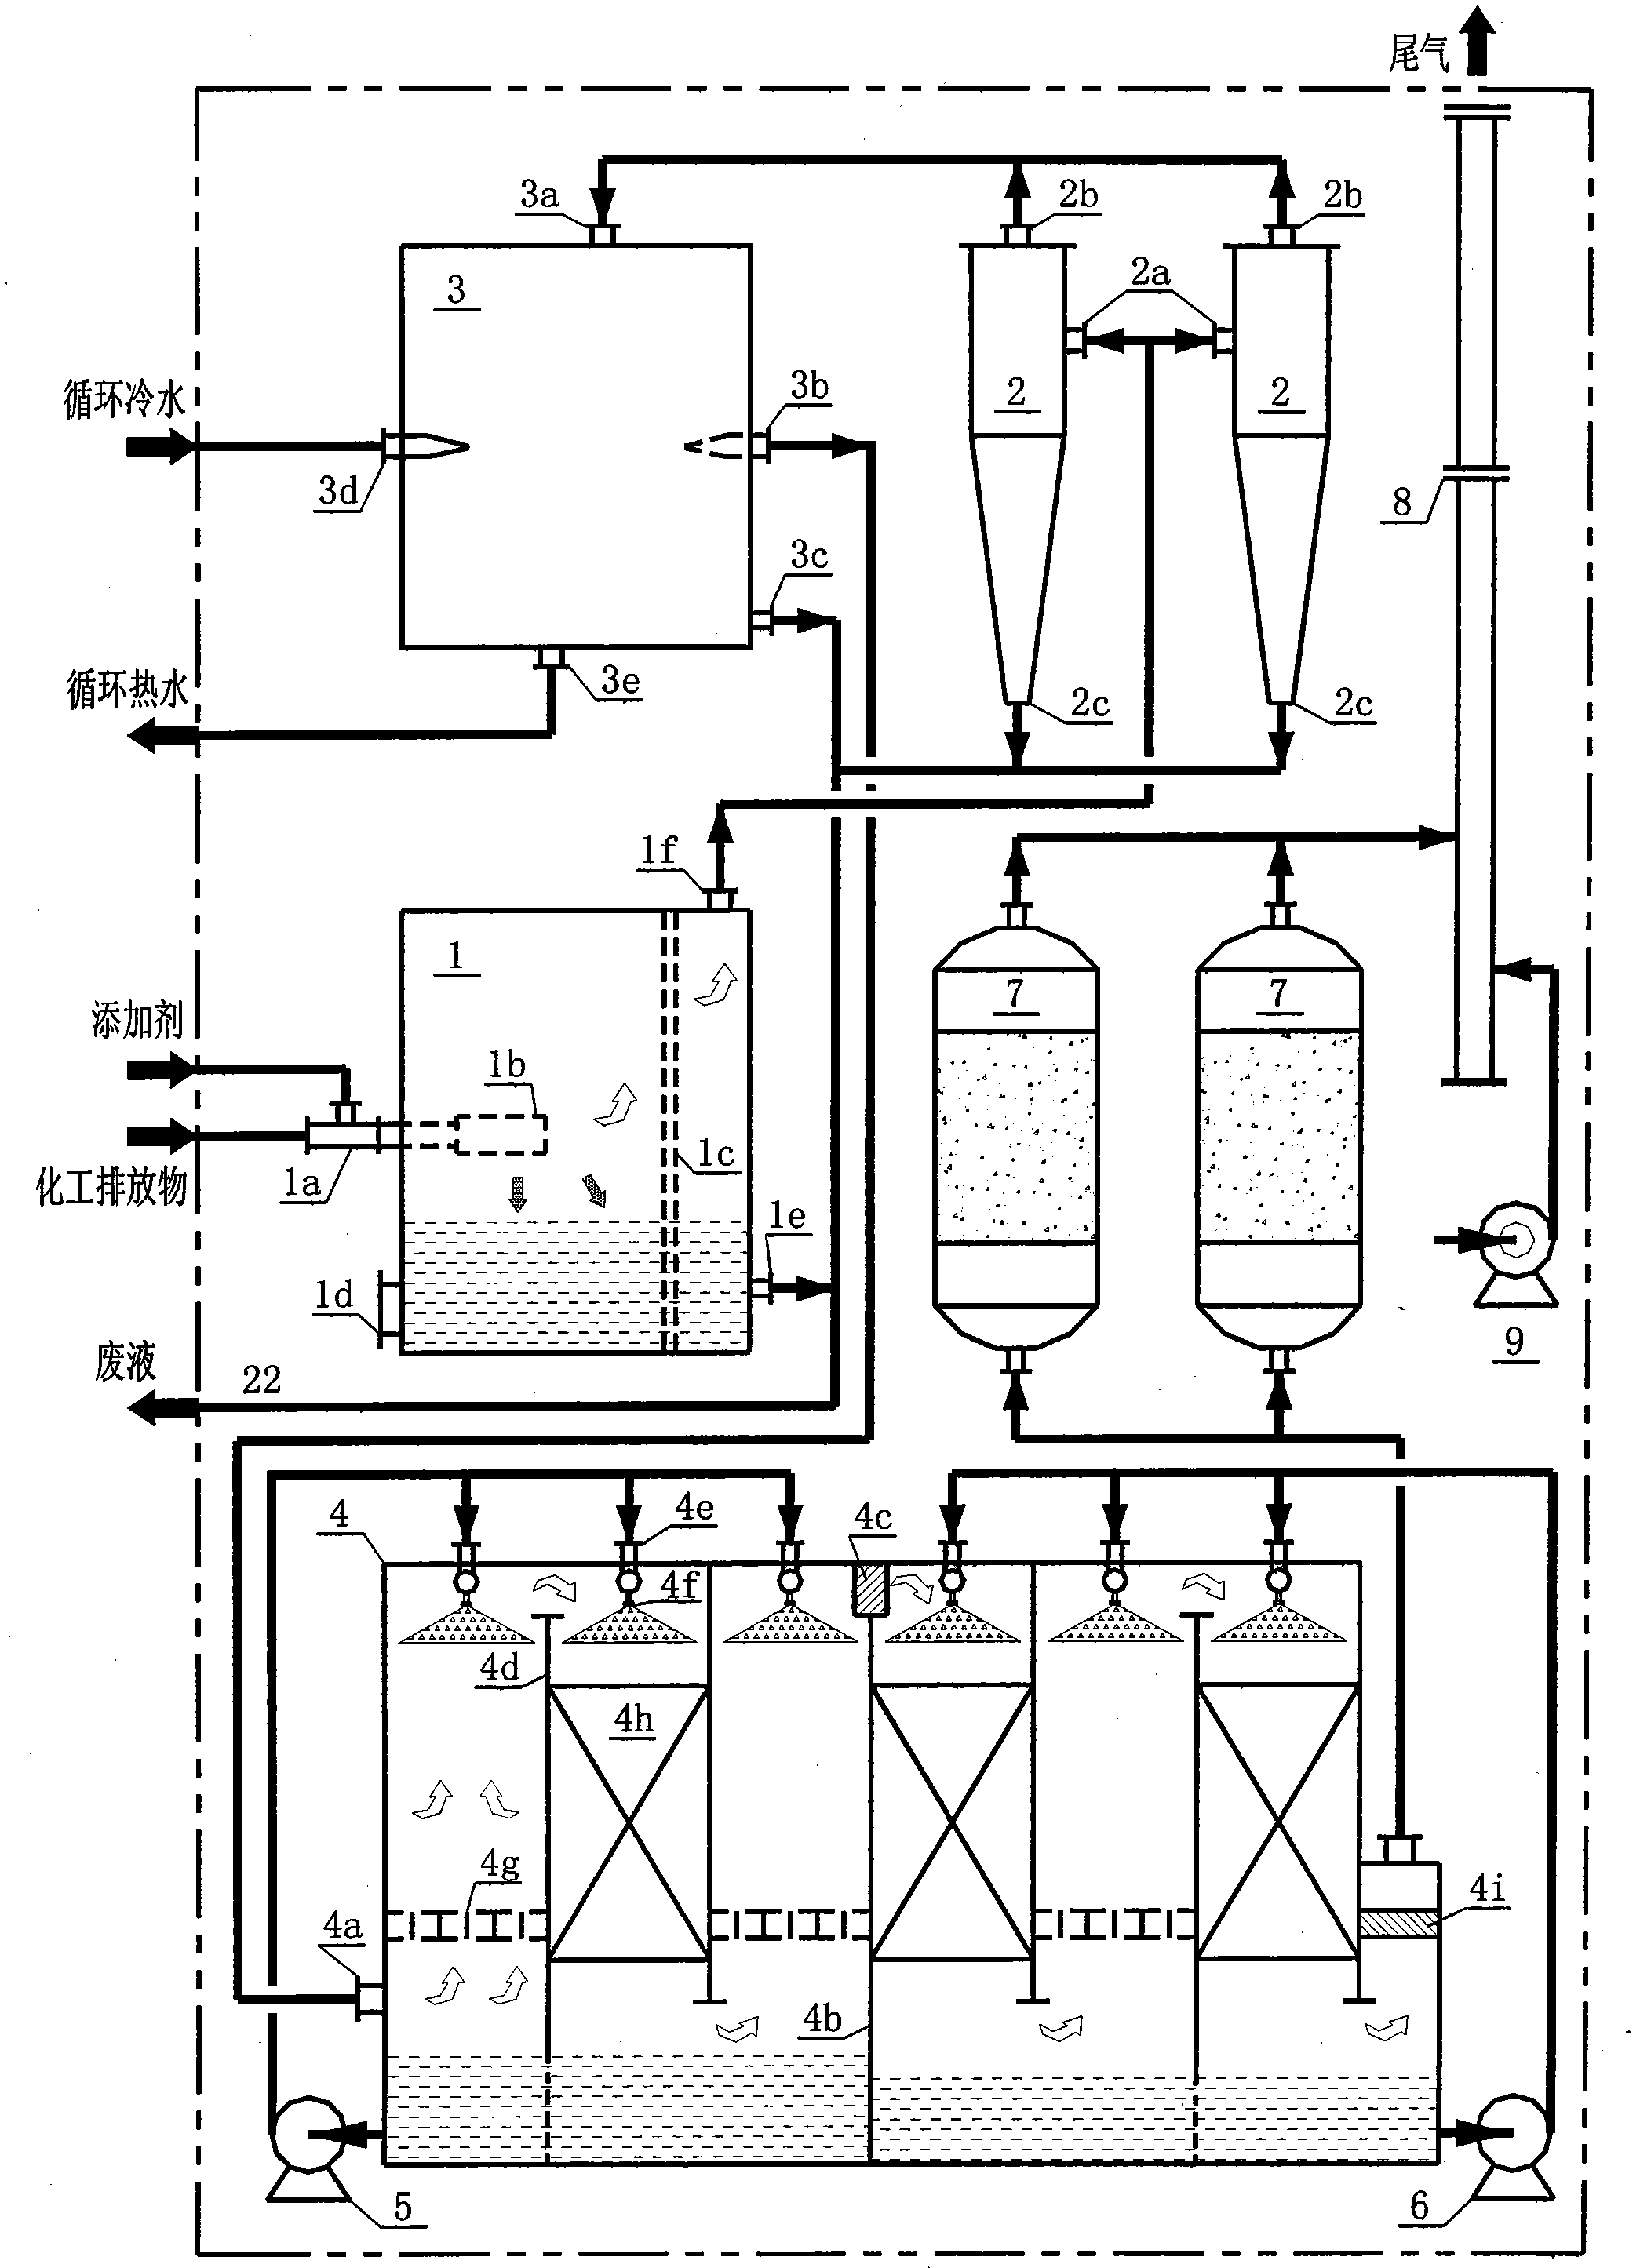 Method and shifting unit for processing chemical-industrial emissions